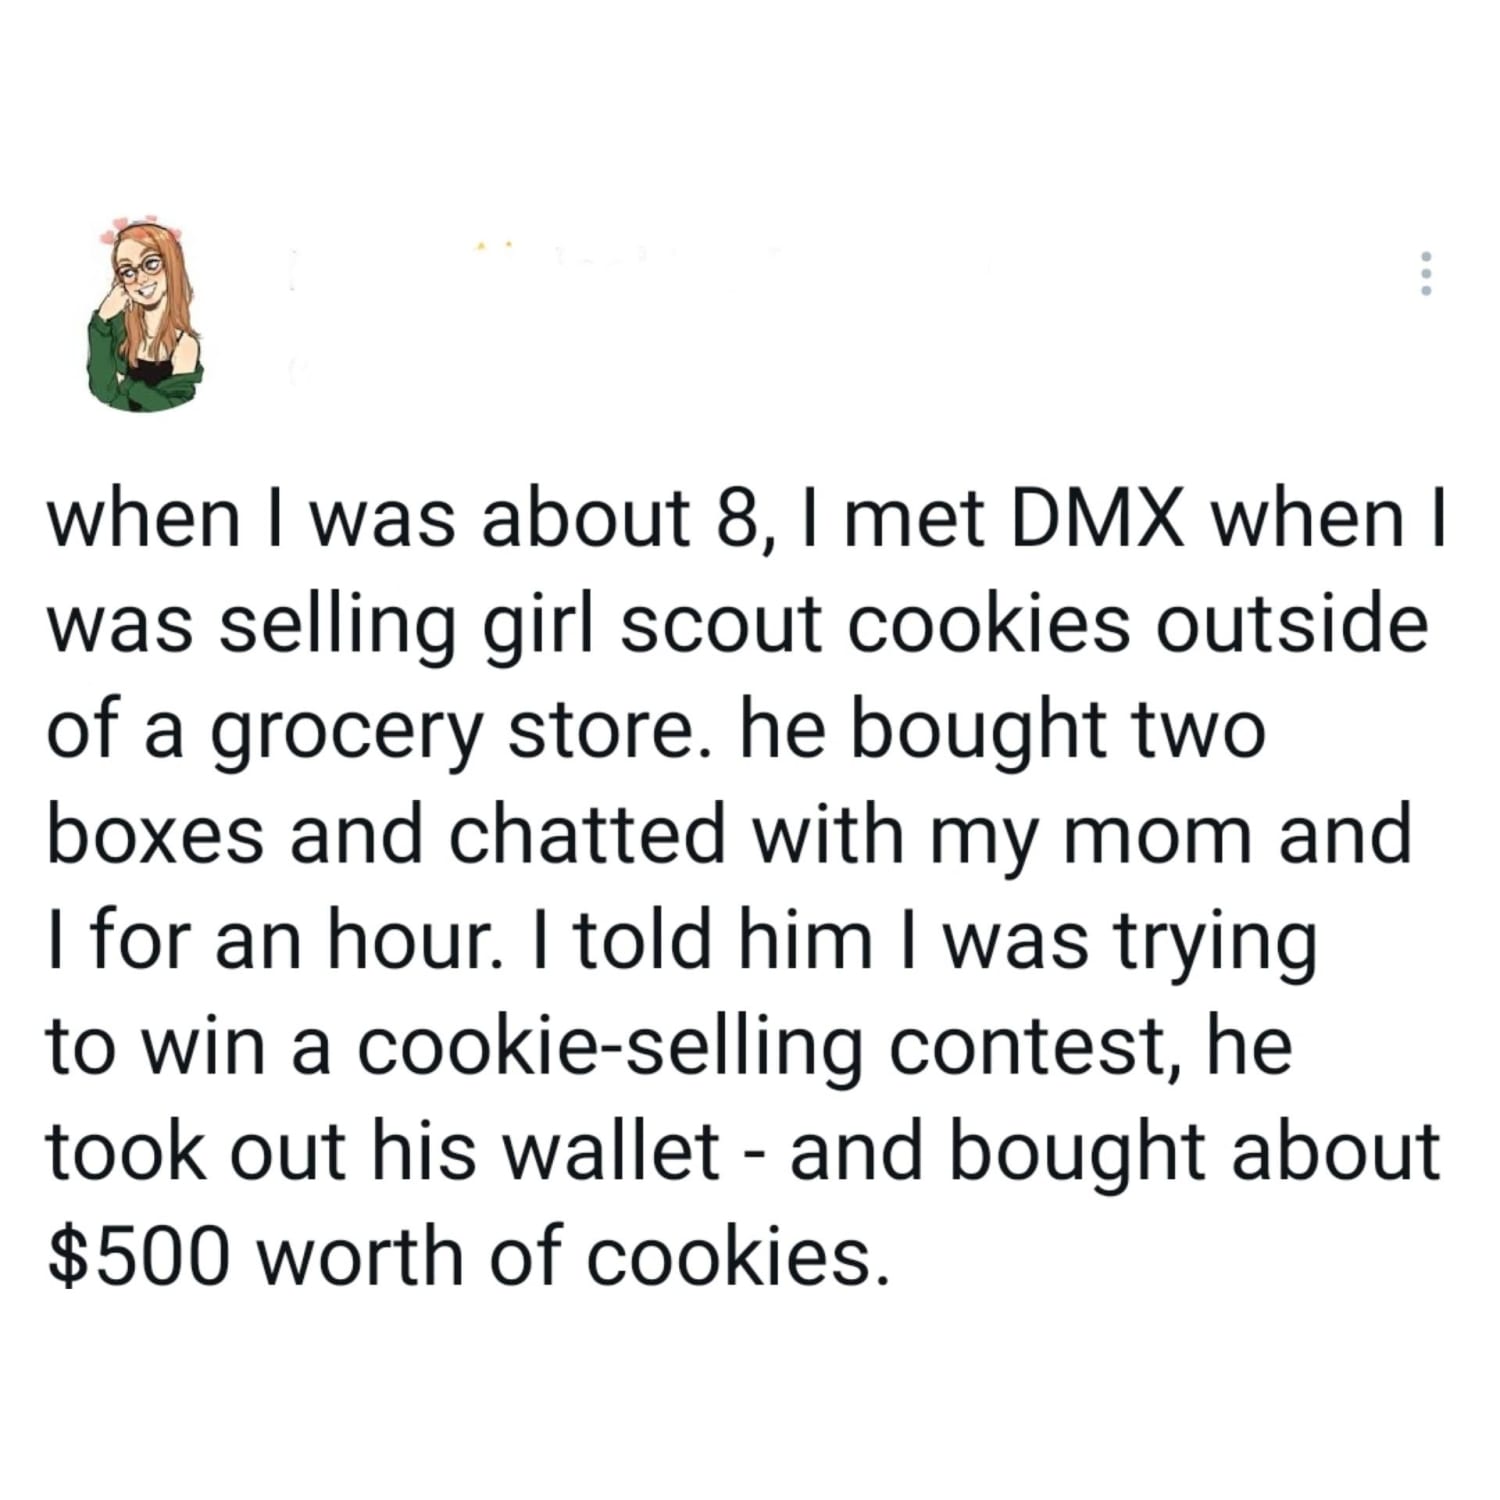 DMX and girl scout cookies